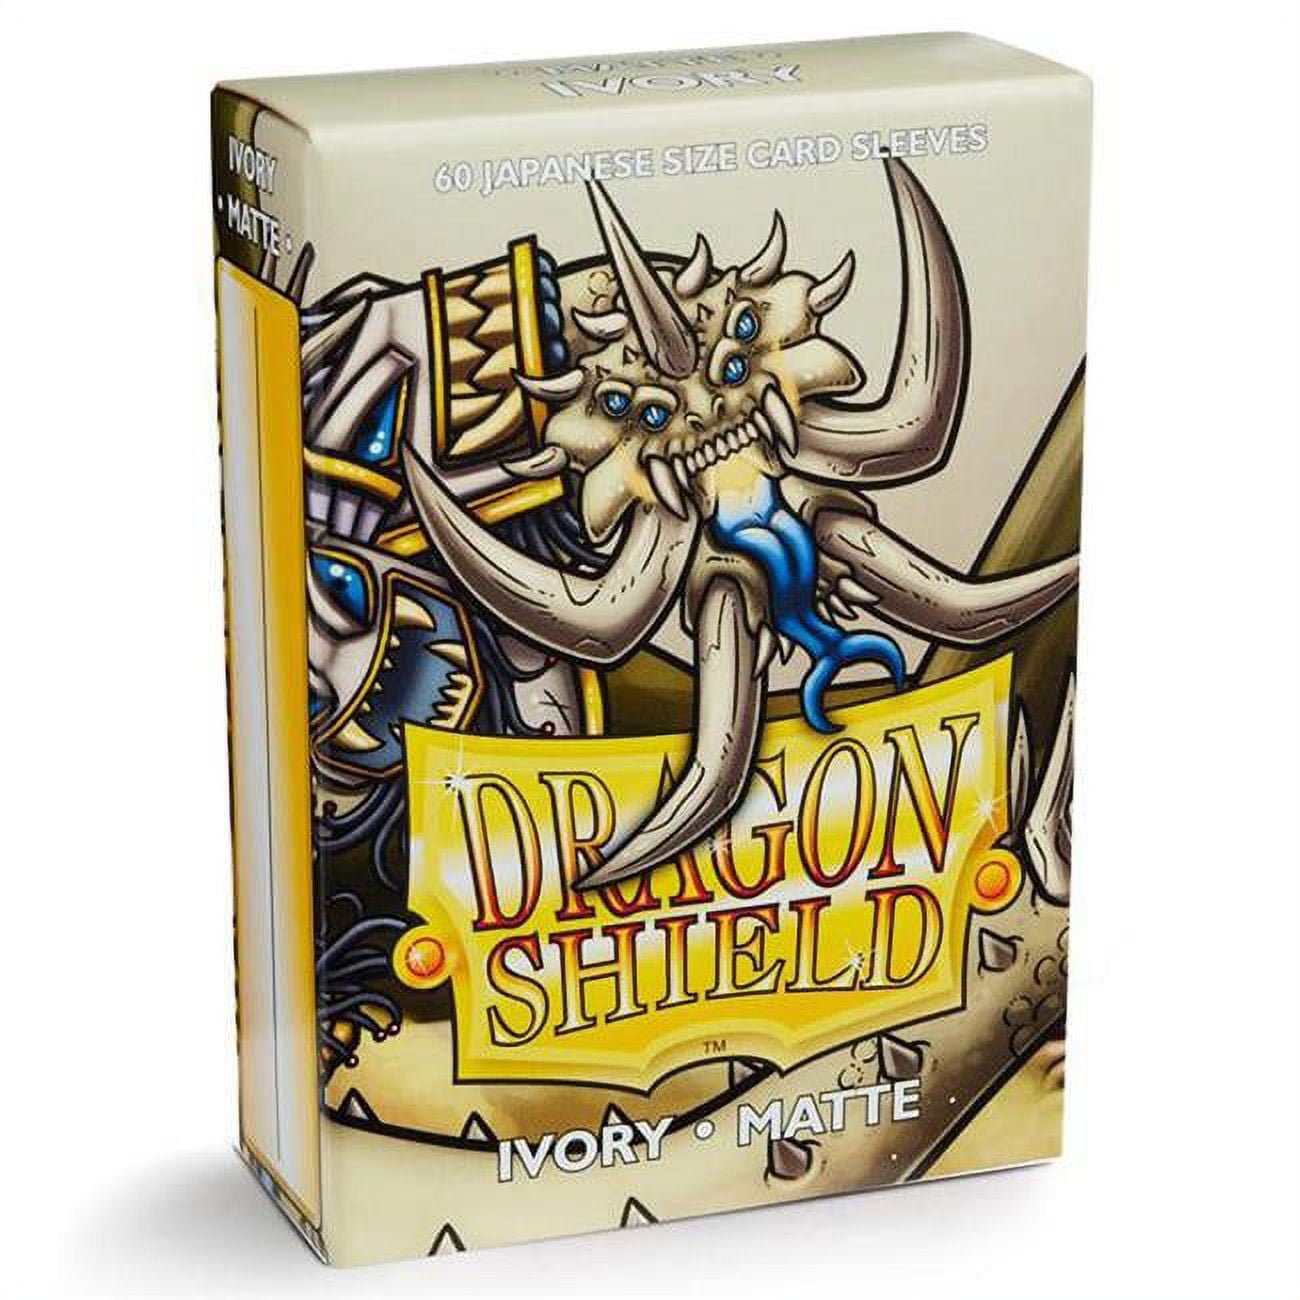 Atm11117 Development Dragon Shield Japanese Matte Iv Card Accessories - Pack Of 60